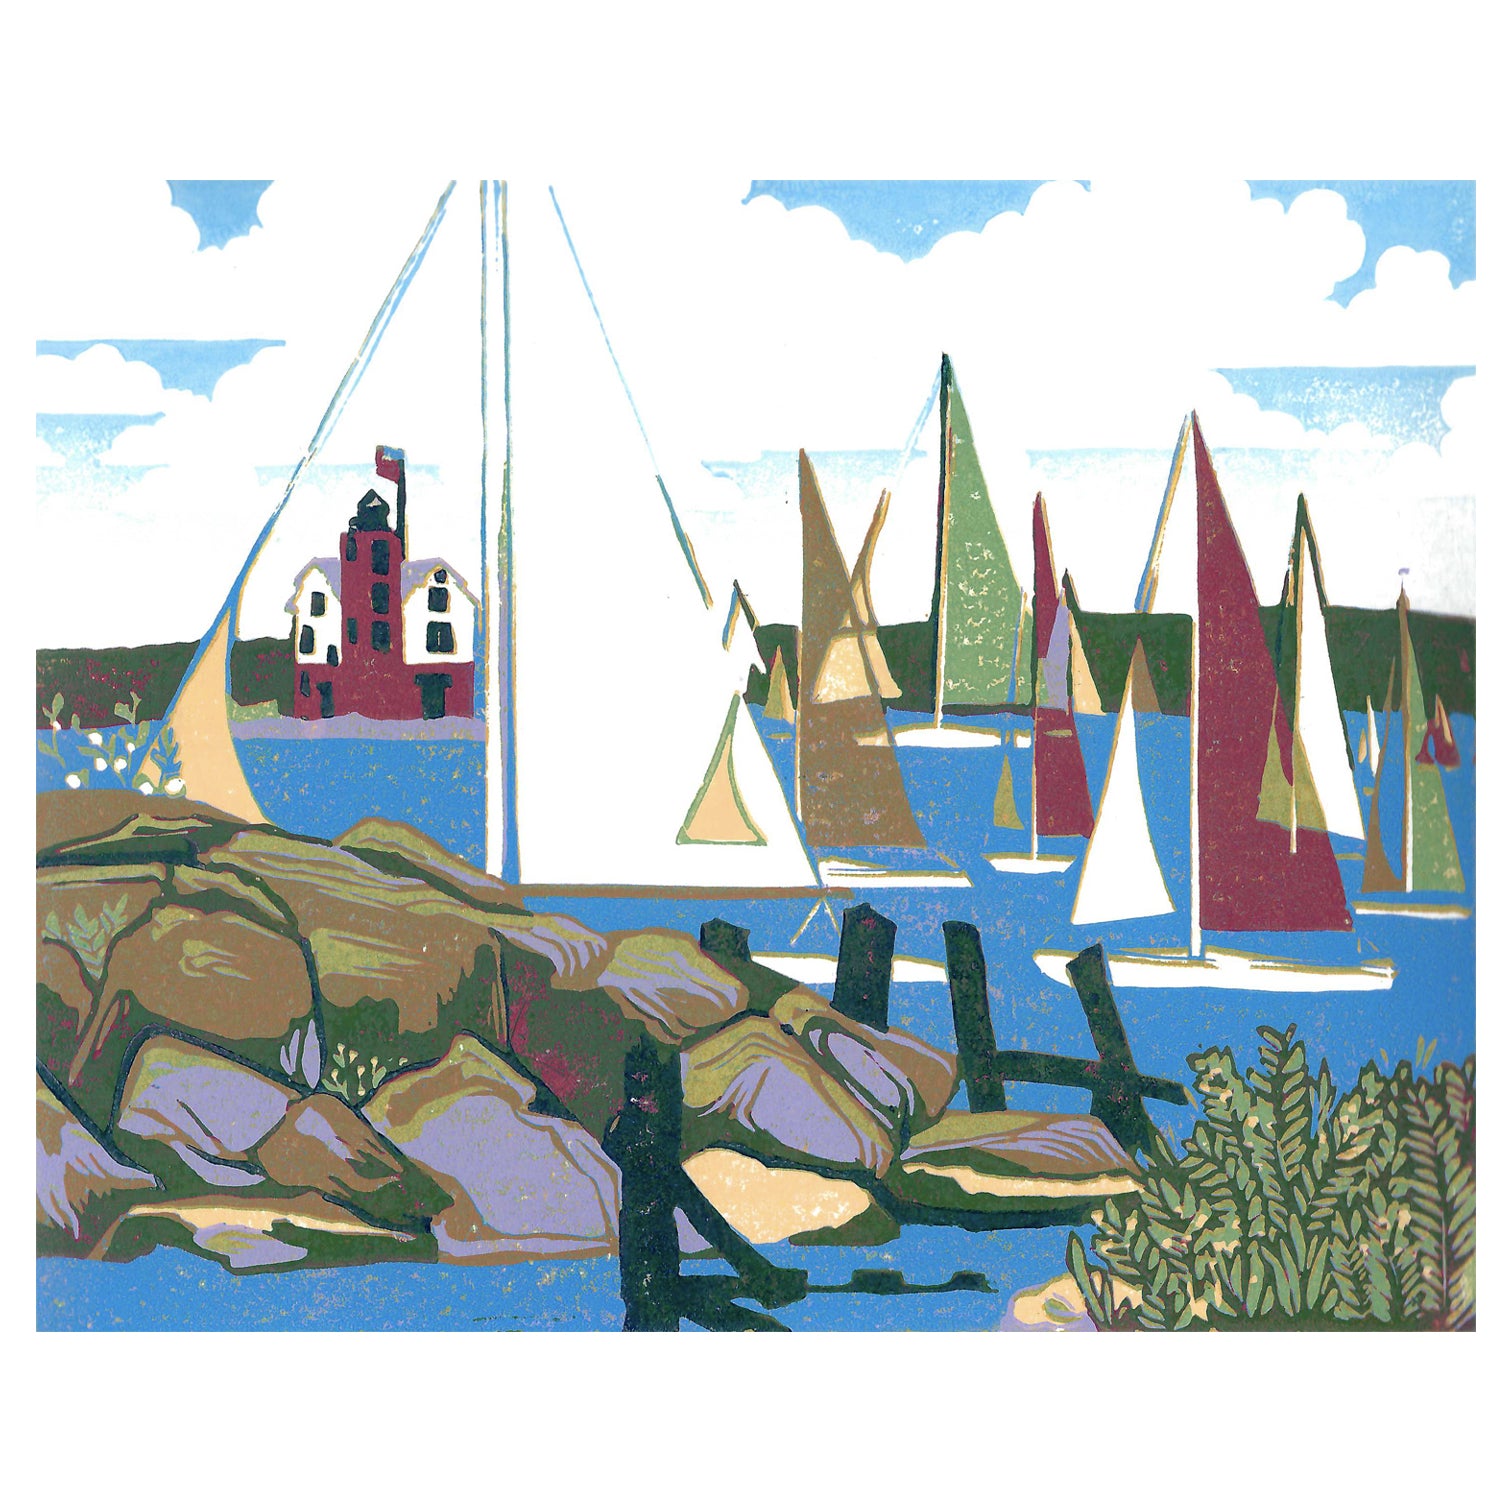 Sailing art created by Natalia Wohletz of Peninsula Prints.  Yacht Race is an original block print inspired by sailors on the Great Lakes, especially competitors in the Chicago Yacht Club Race to Mackinac and Bayview Mackinac Race.